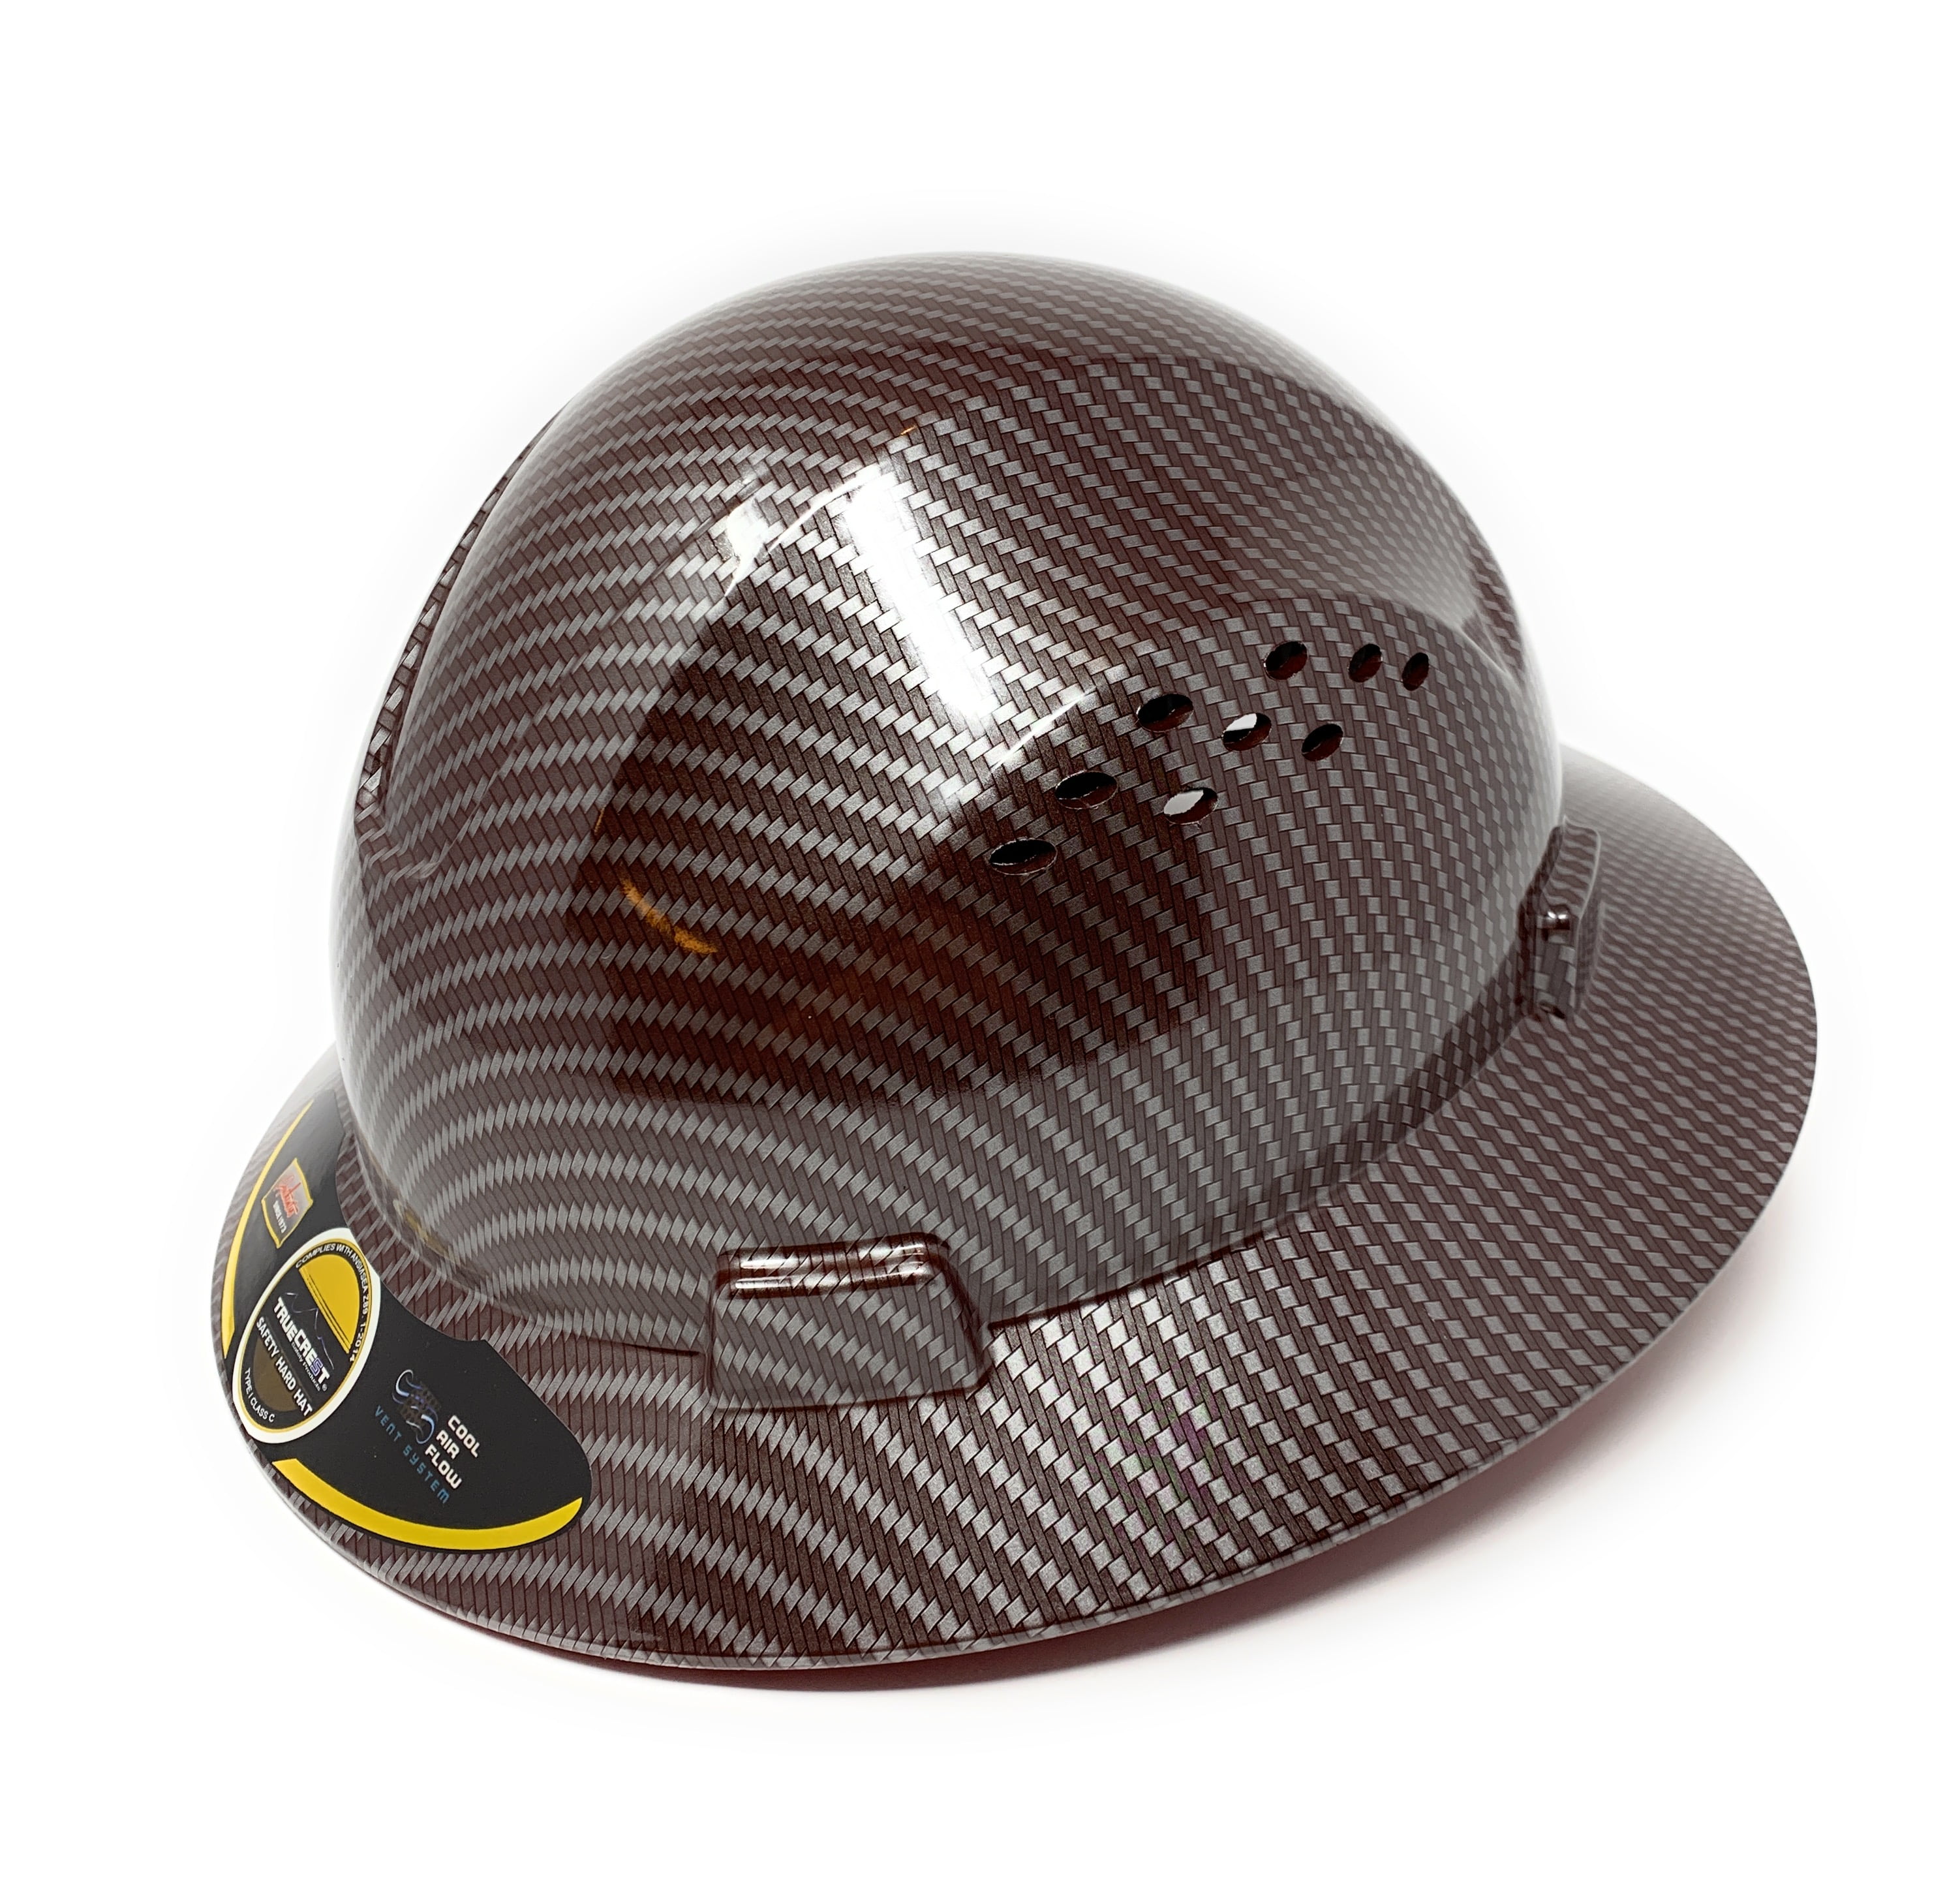 HDPE  LIMA Full Brim Hard Hat with Fas-trac Suspension